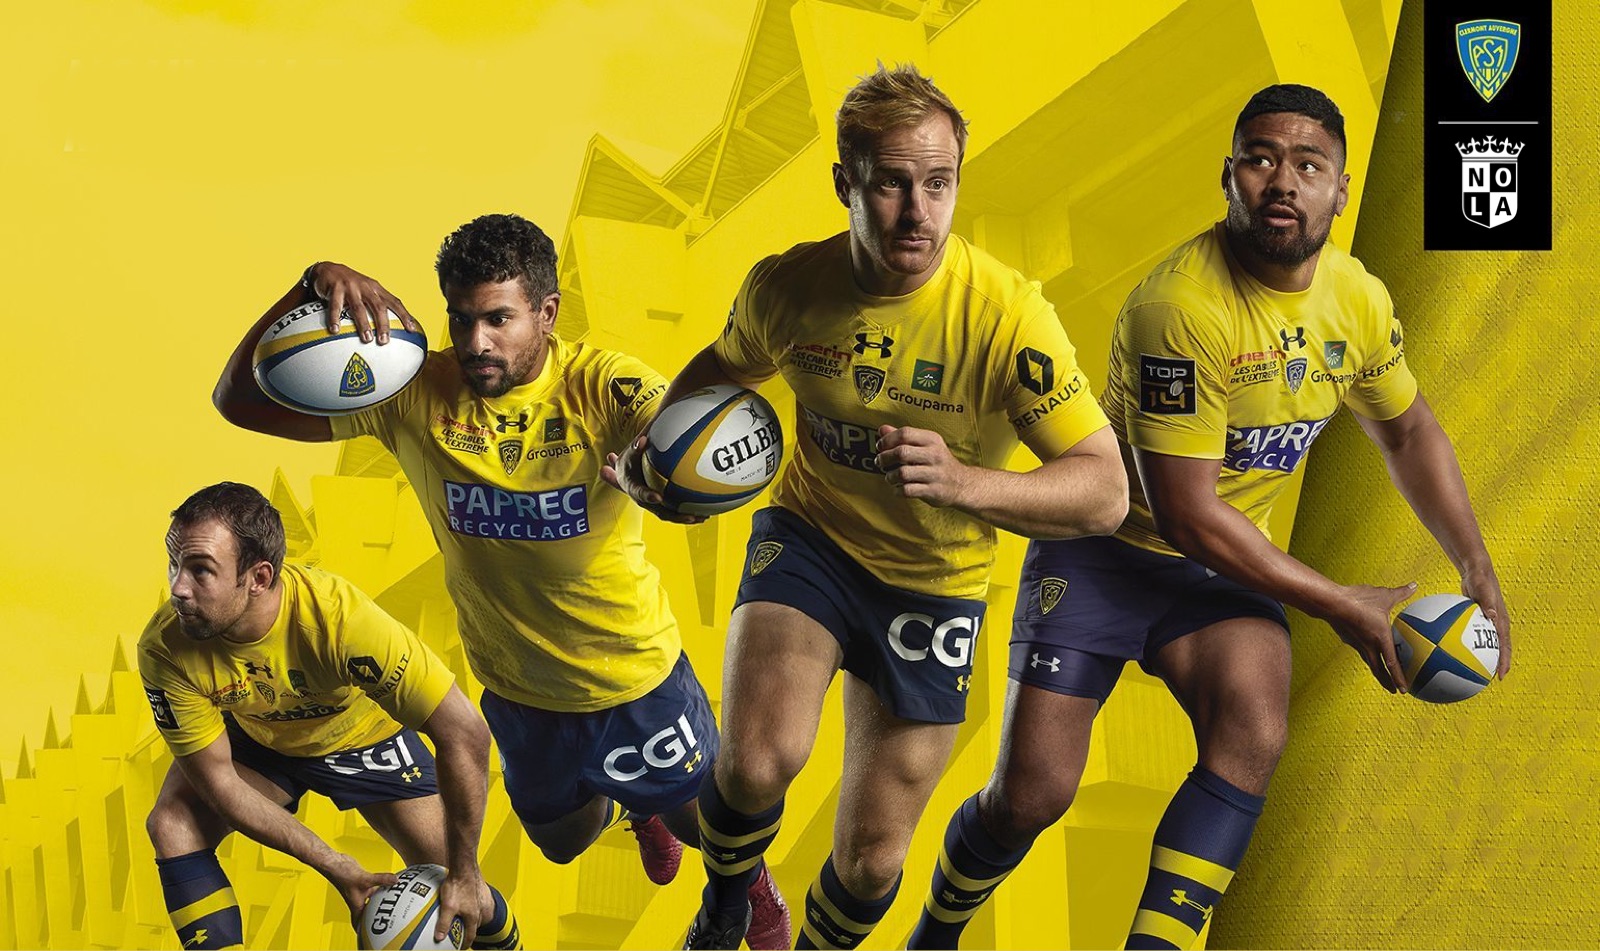 NOLA Gold partners with ASM Clermont Auvergne